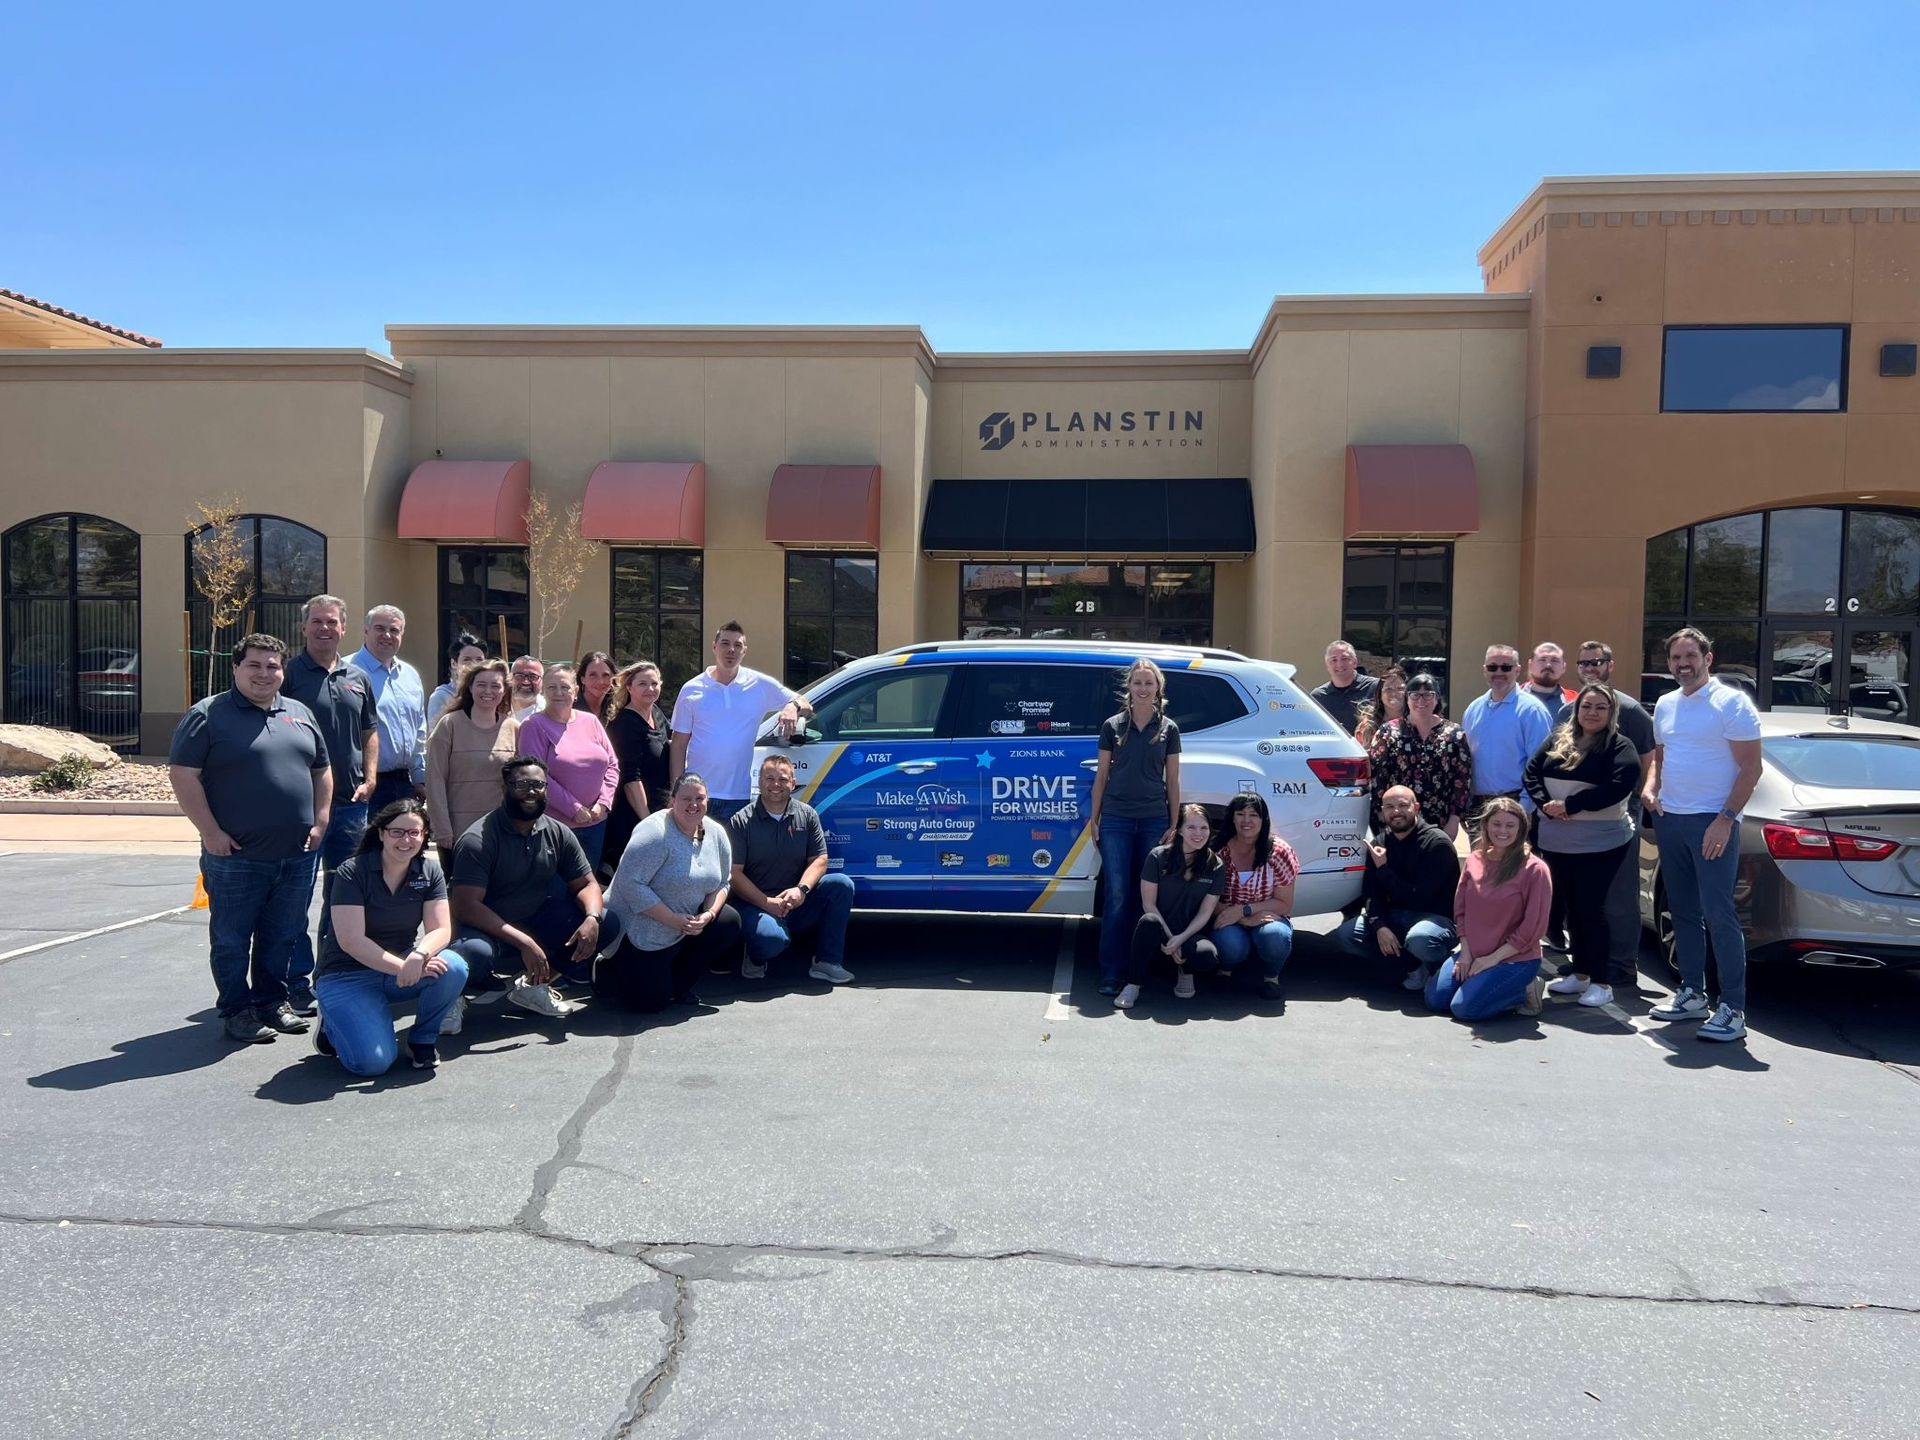 A group of people posing for a picture in front of a building with the Make-A-Wish car.